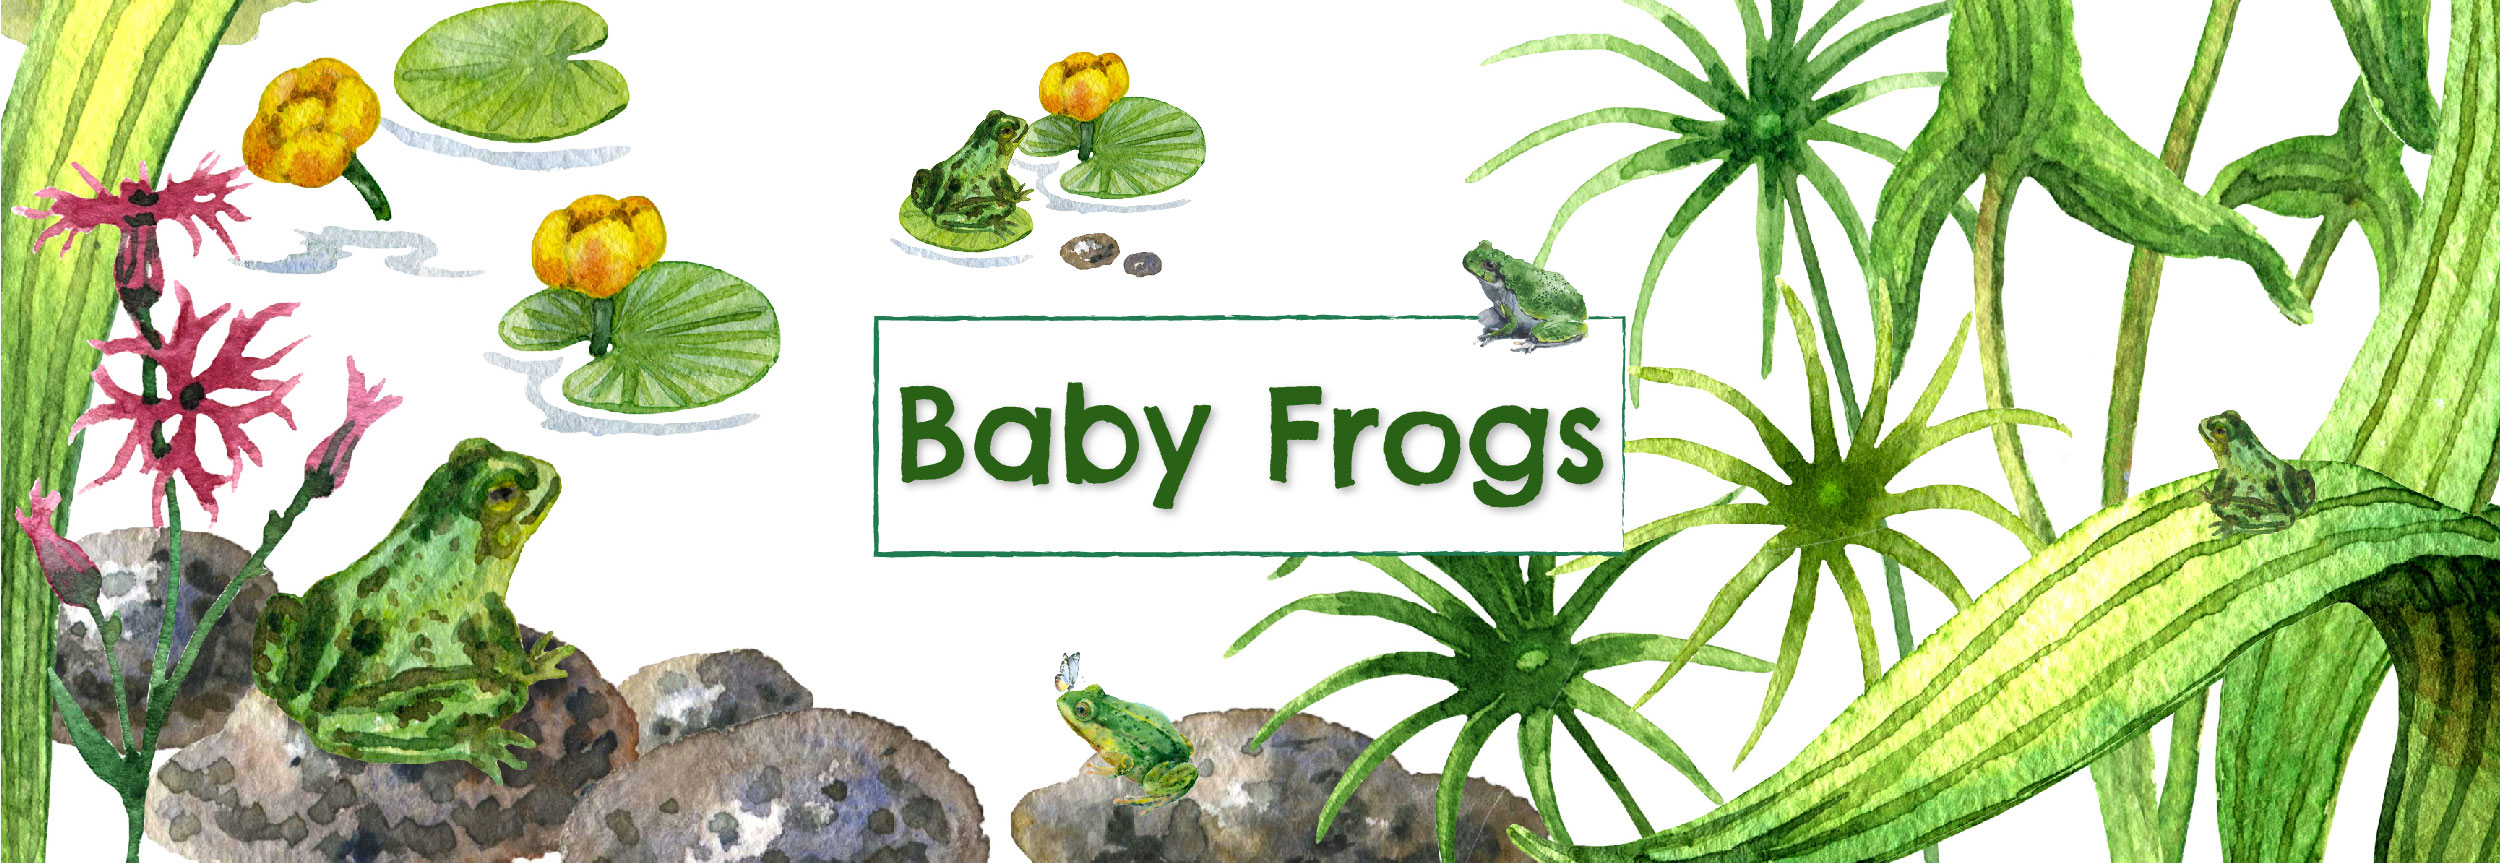 Baby Frogs - The Good and the Beautiful